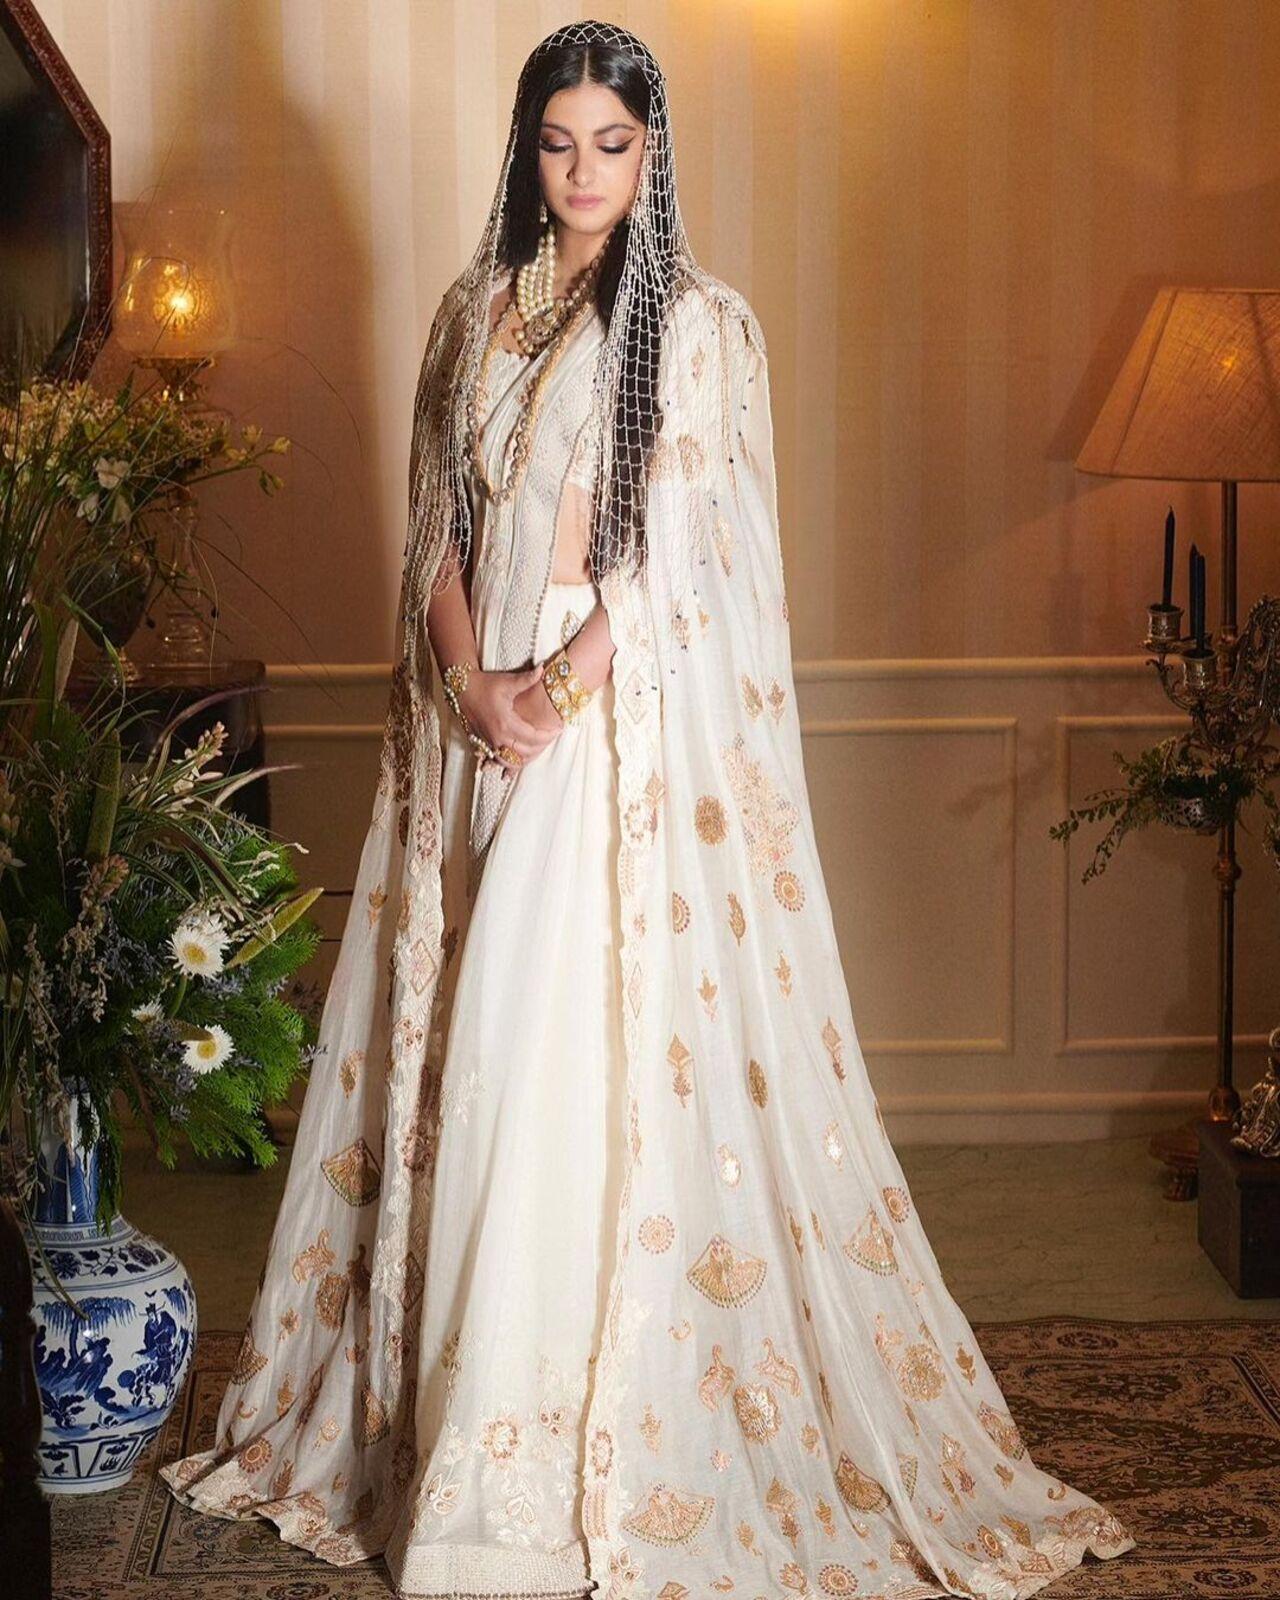 Rhea Kapoor made for a stunning bride in a white saree. It was her pearl veil that elevated the look and gave it a trendy touch